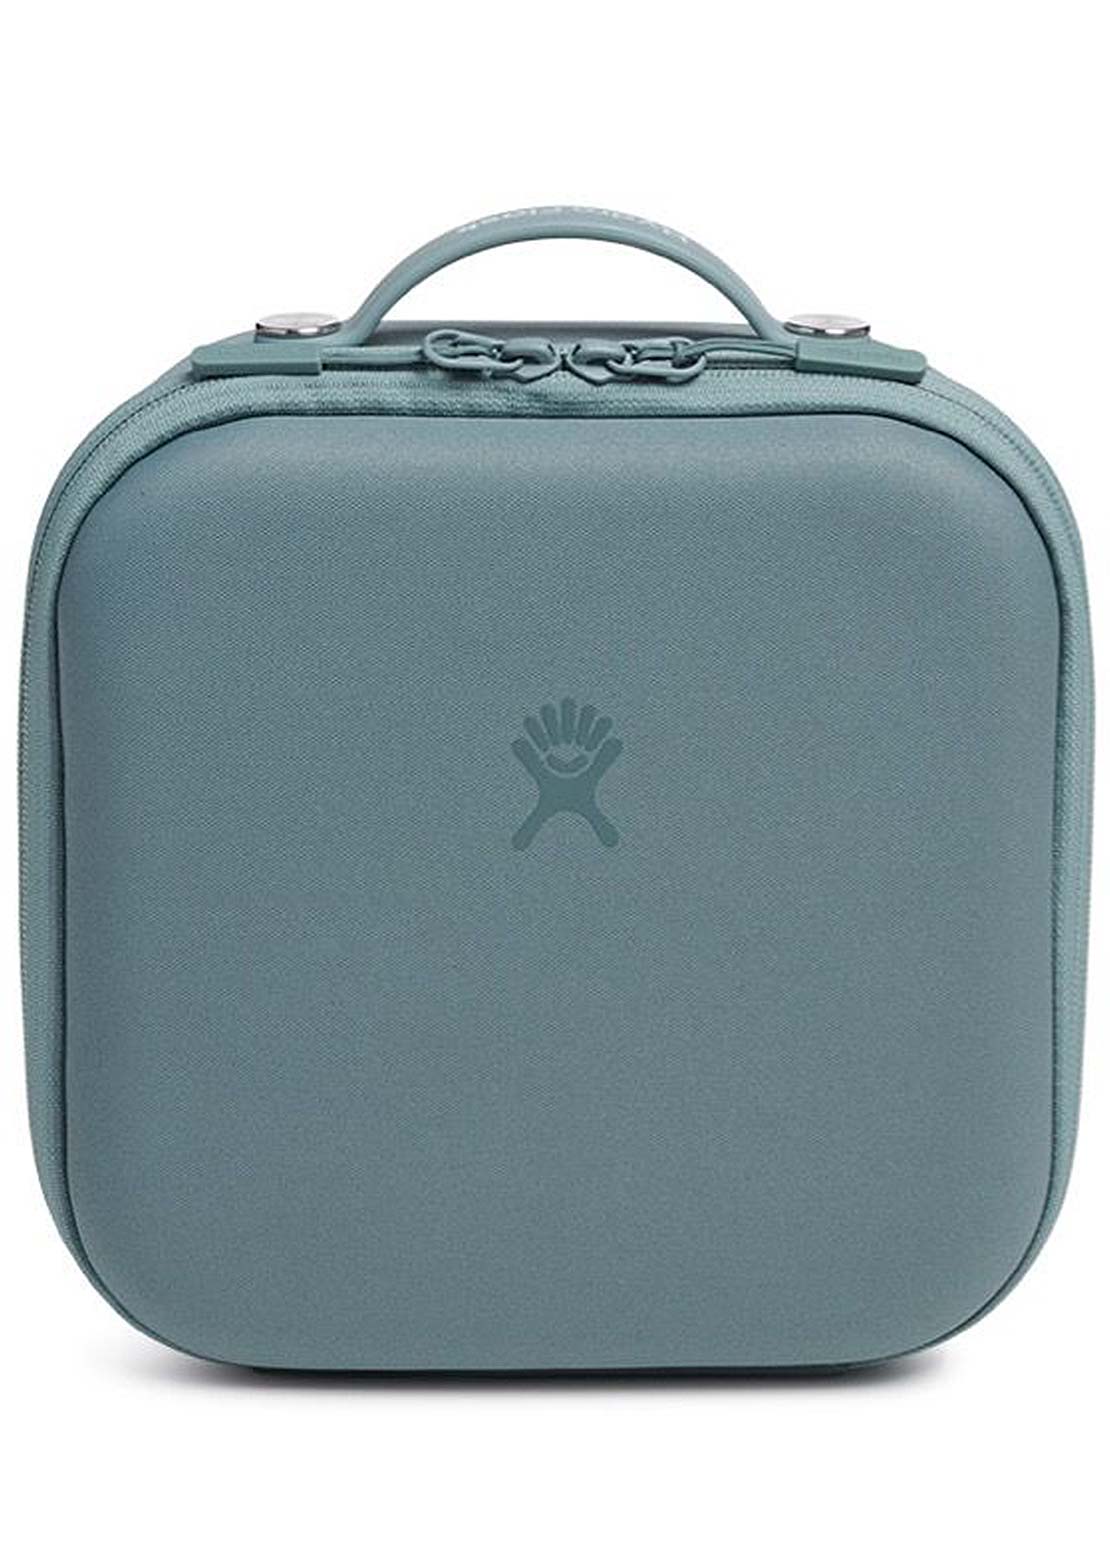 Hydro Flask Small Insulated Lunch Box Baltic